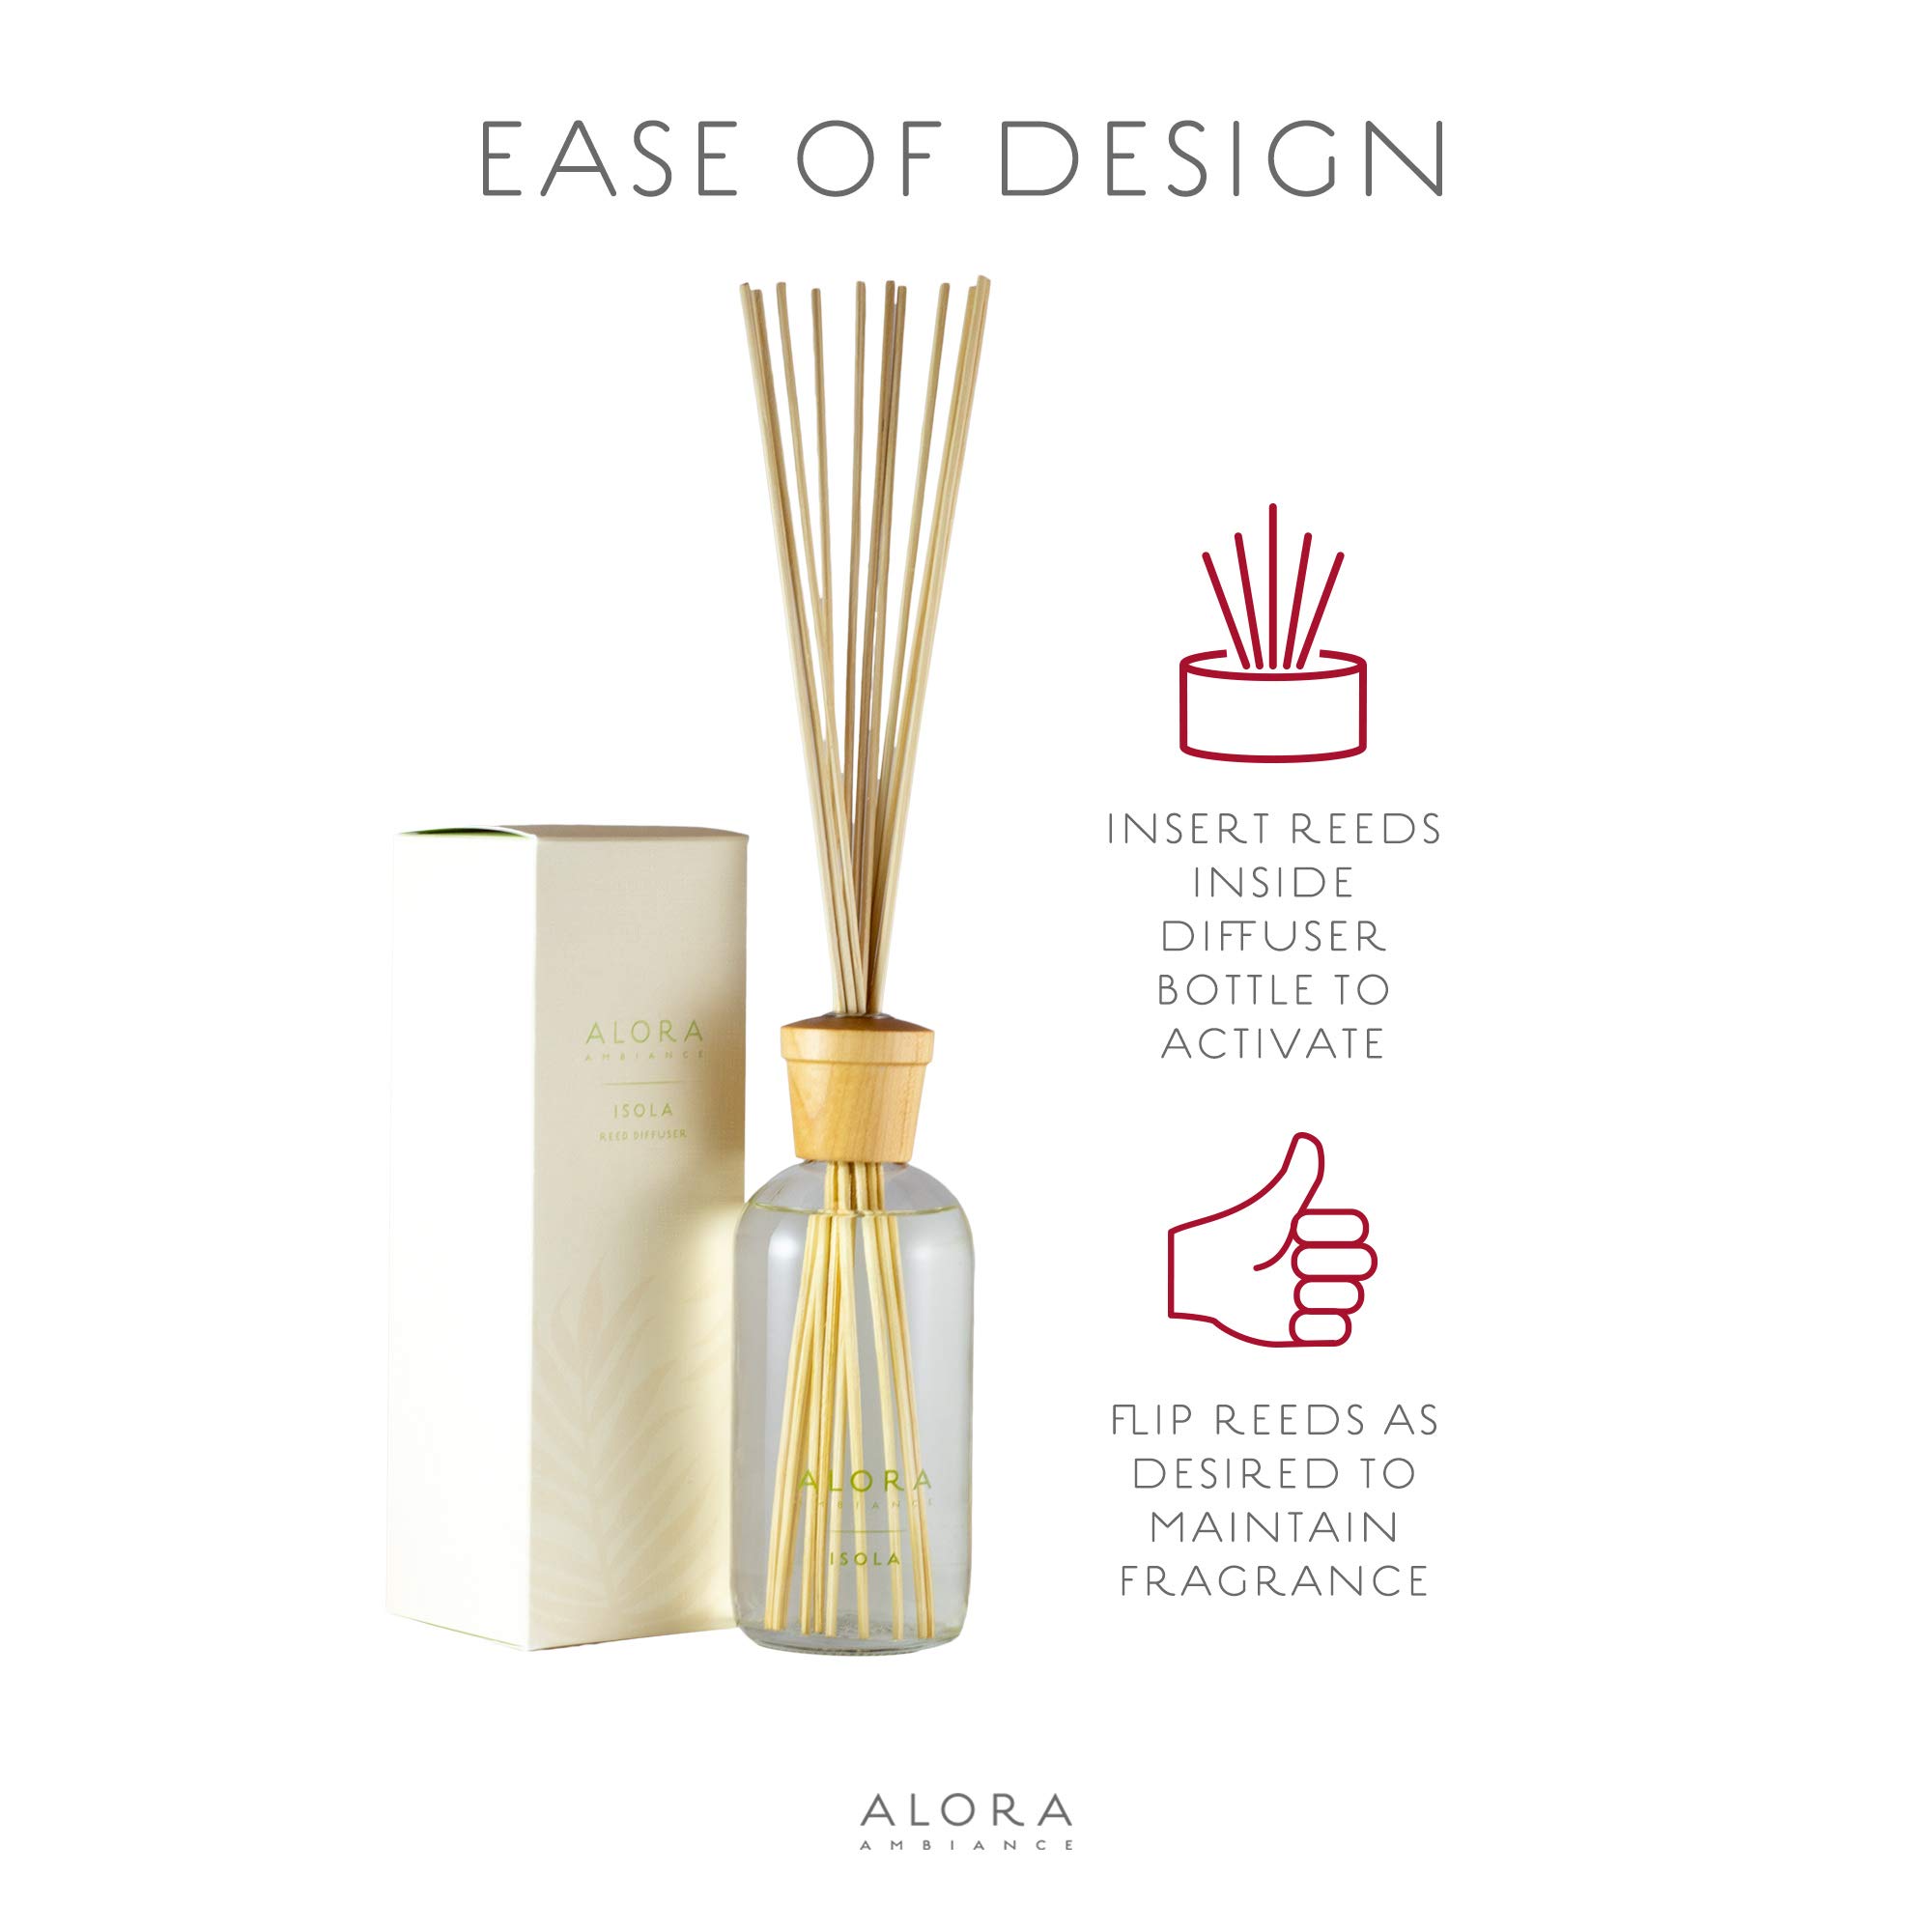 Isola Reed Diffuser 16oz diffuser by Alora Ambiance